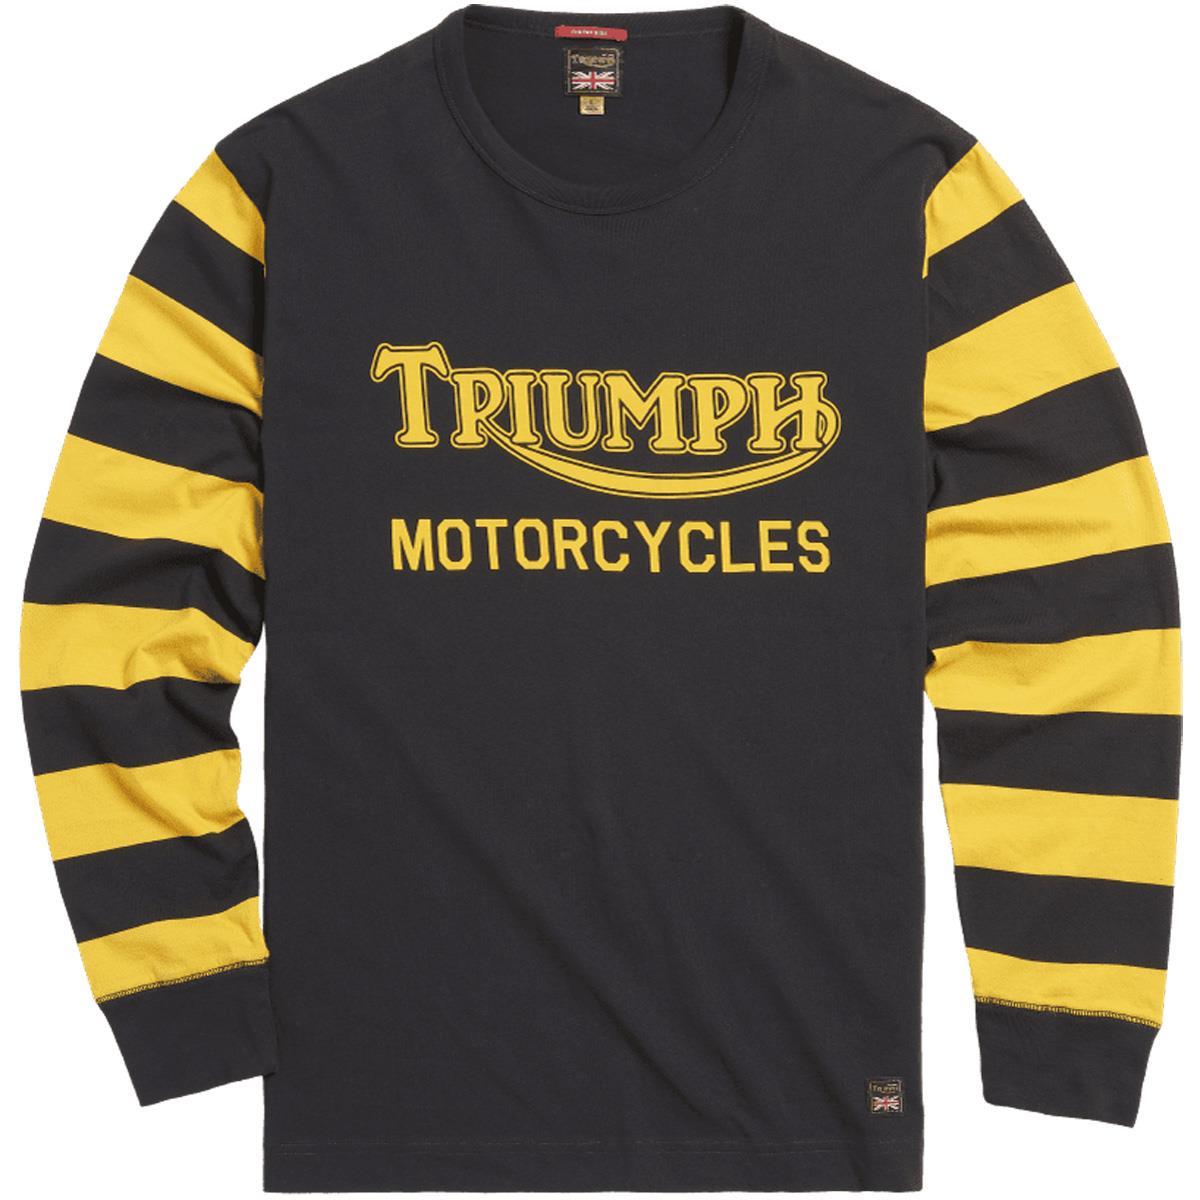 What is displayed on the back of the Triumph Ignition Coil Long Sleeve Tee?